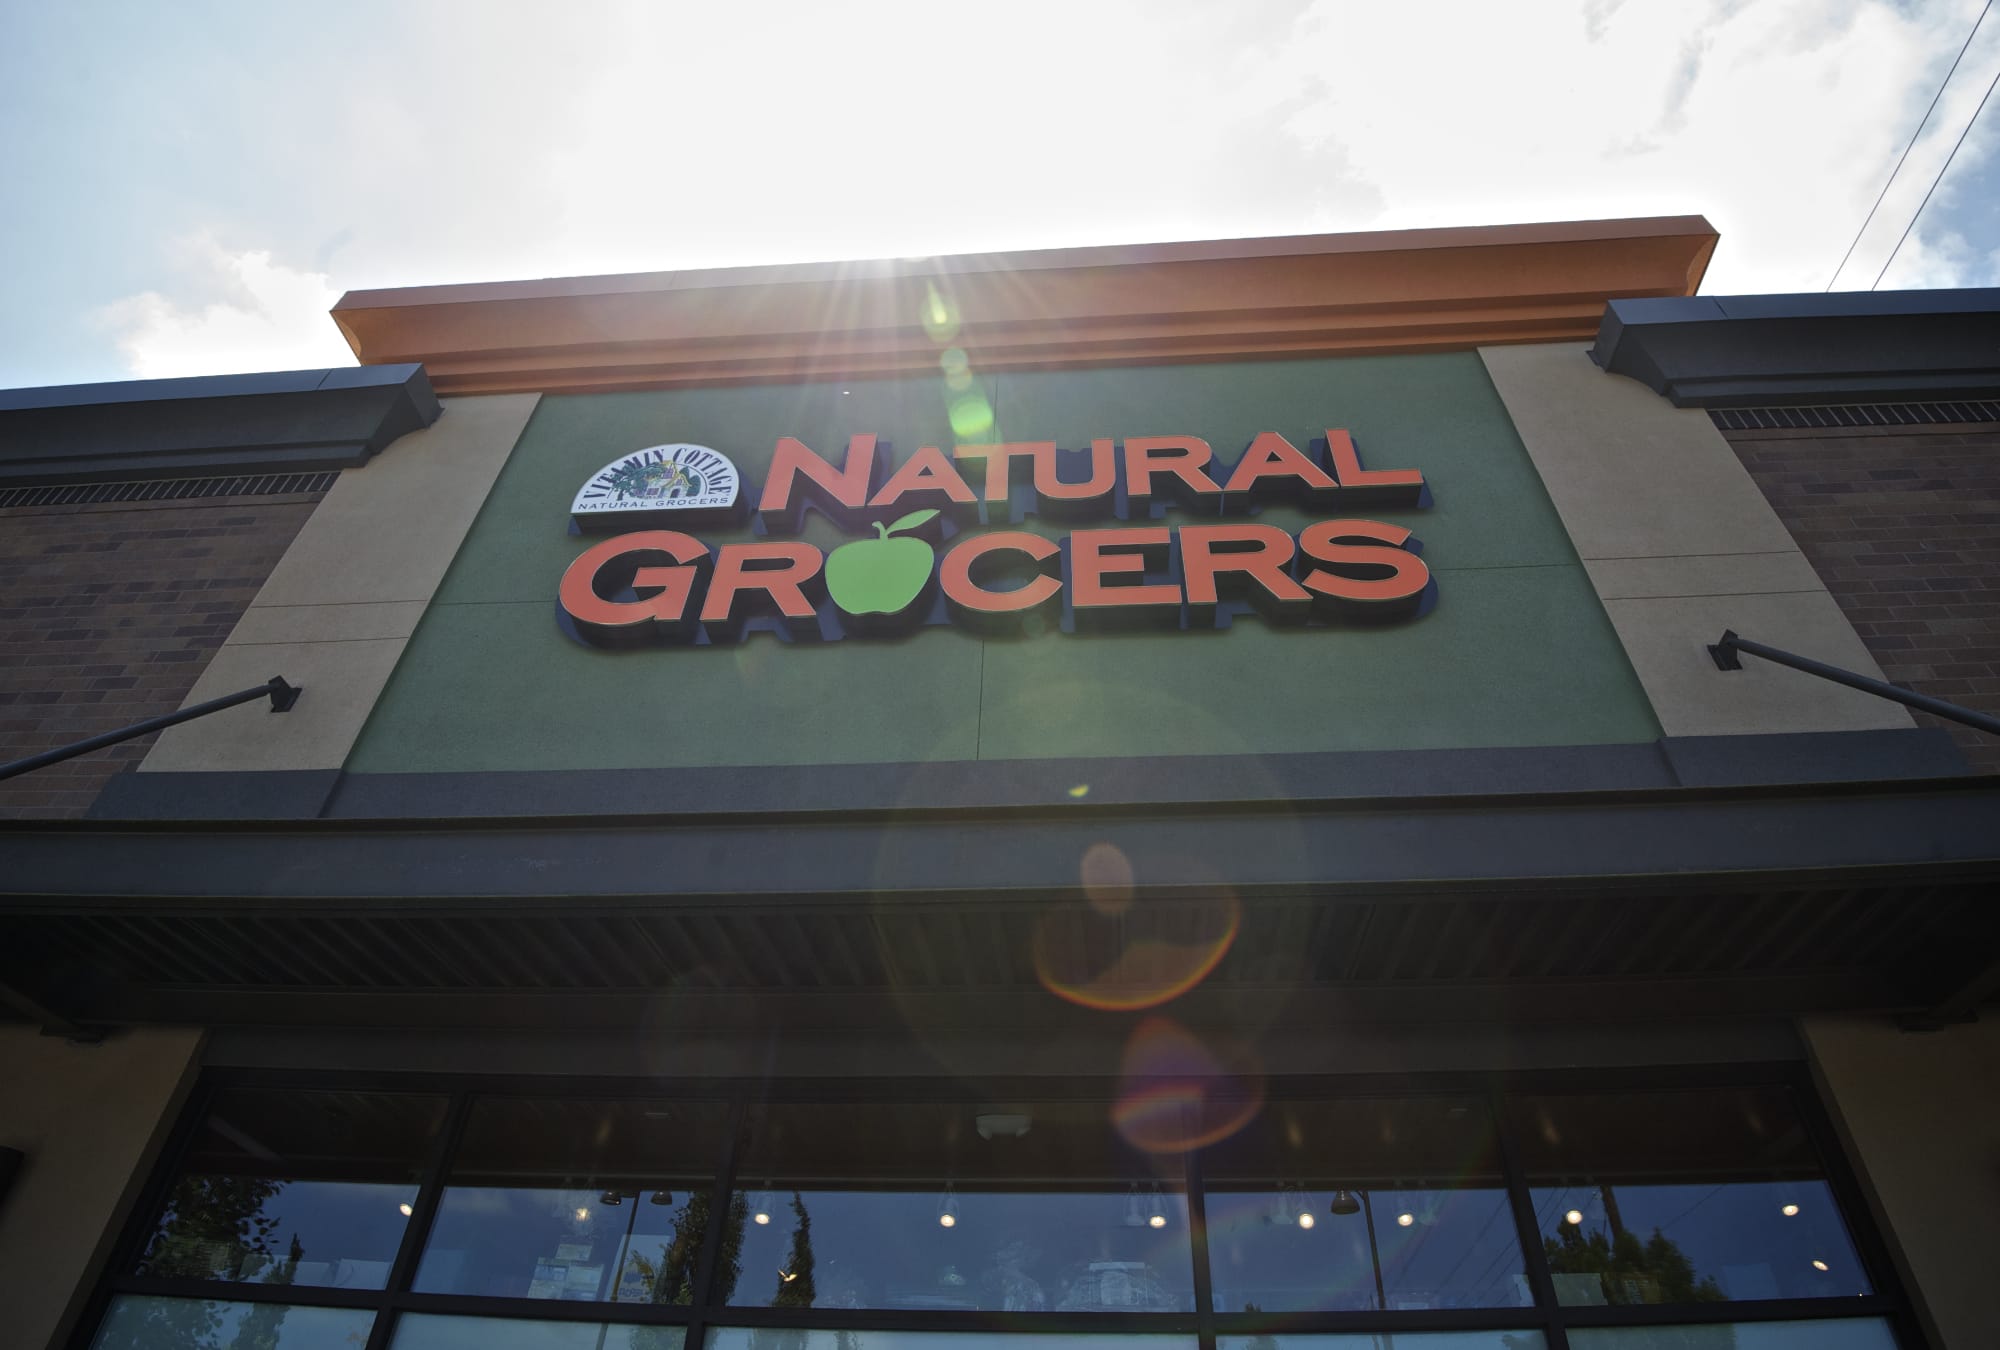 Natural Grocers is open for business in the Hazel Dell Square shopping center off 78th Street.